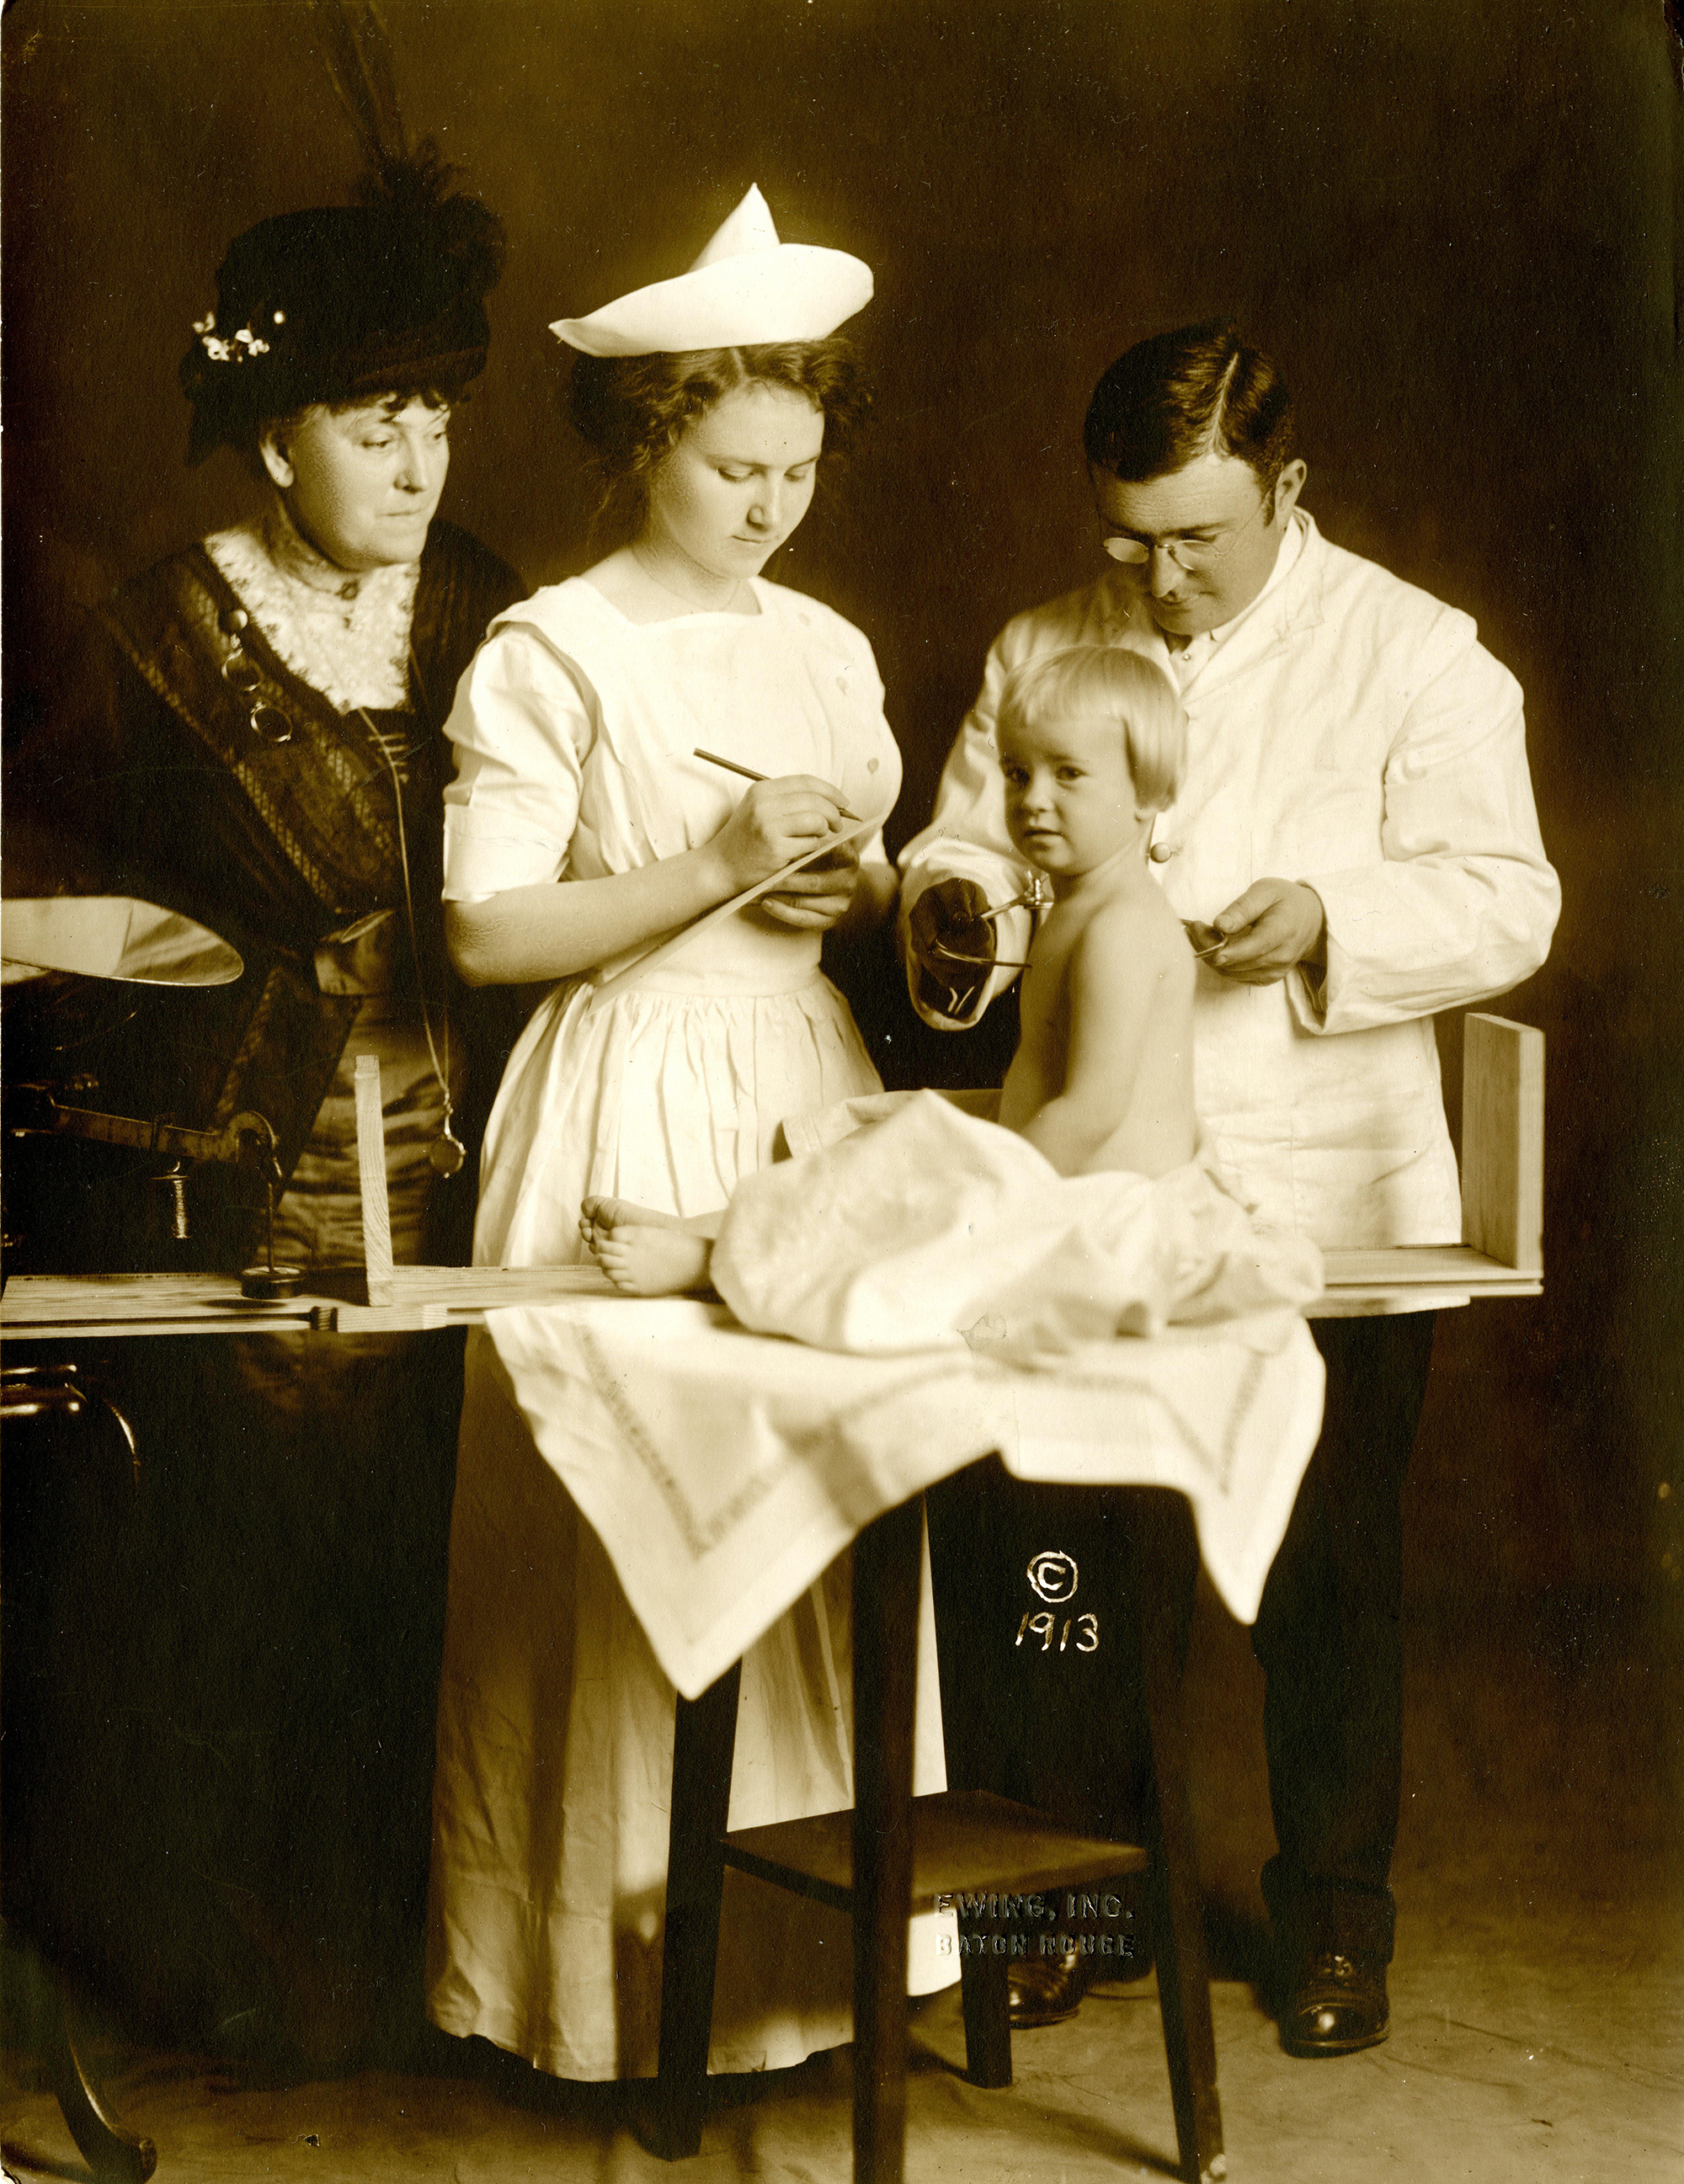 sepia-toned image of a baby with family in doctor's office